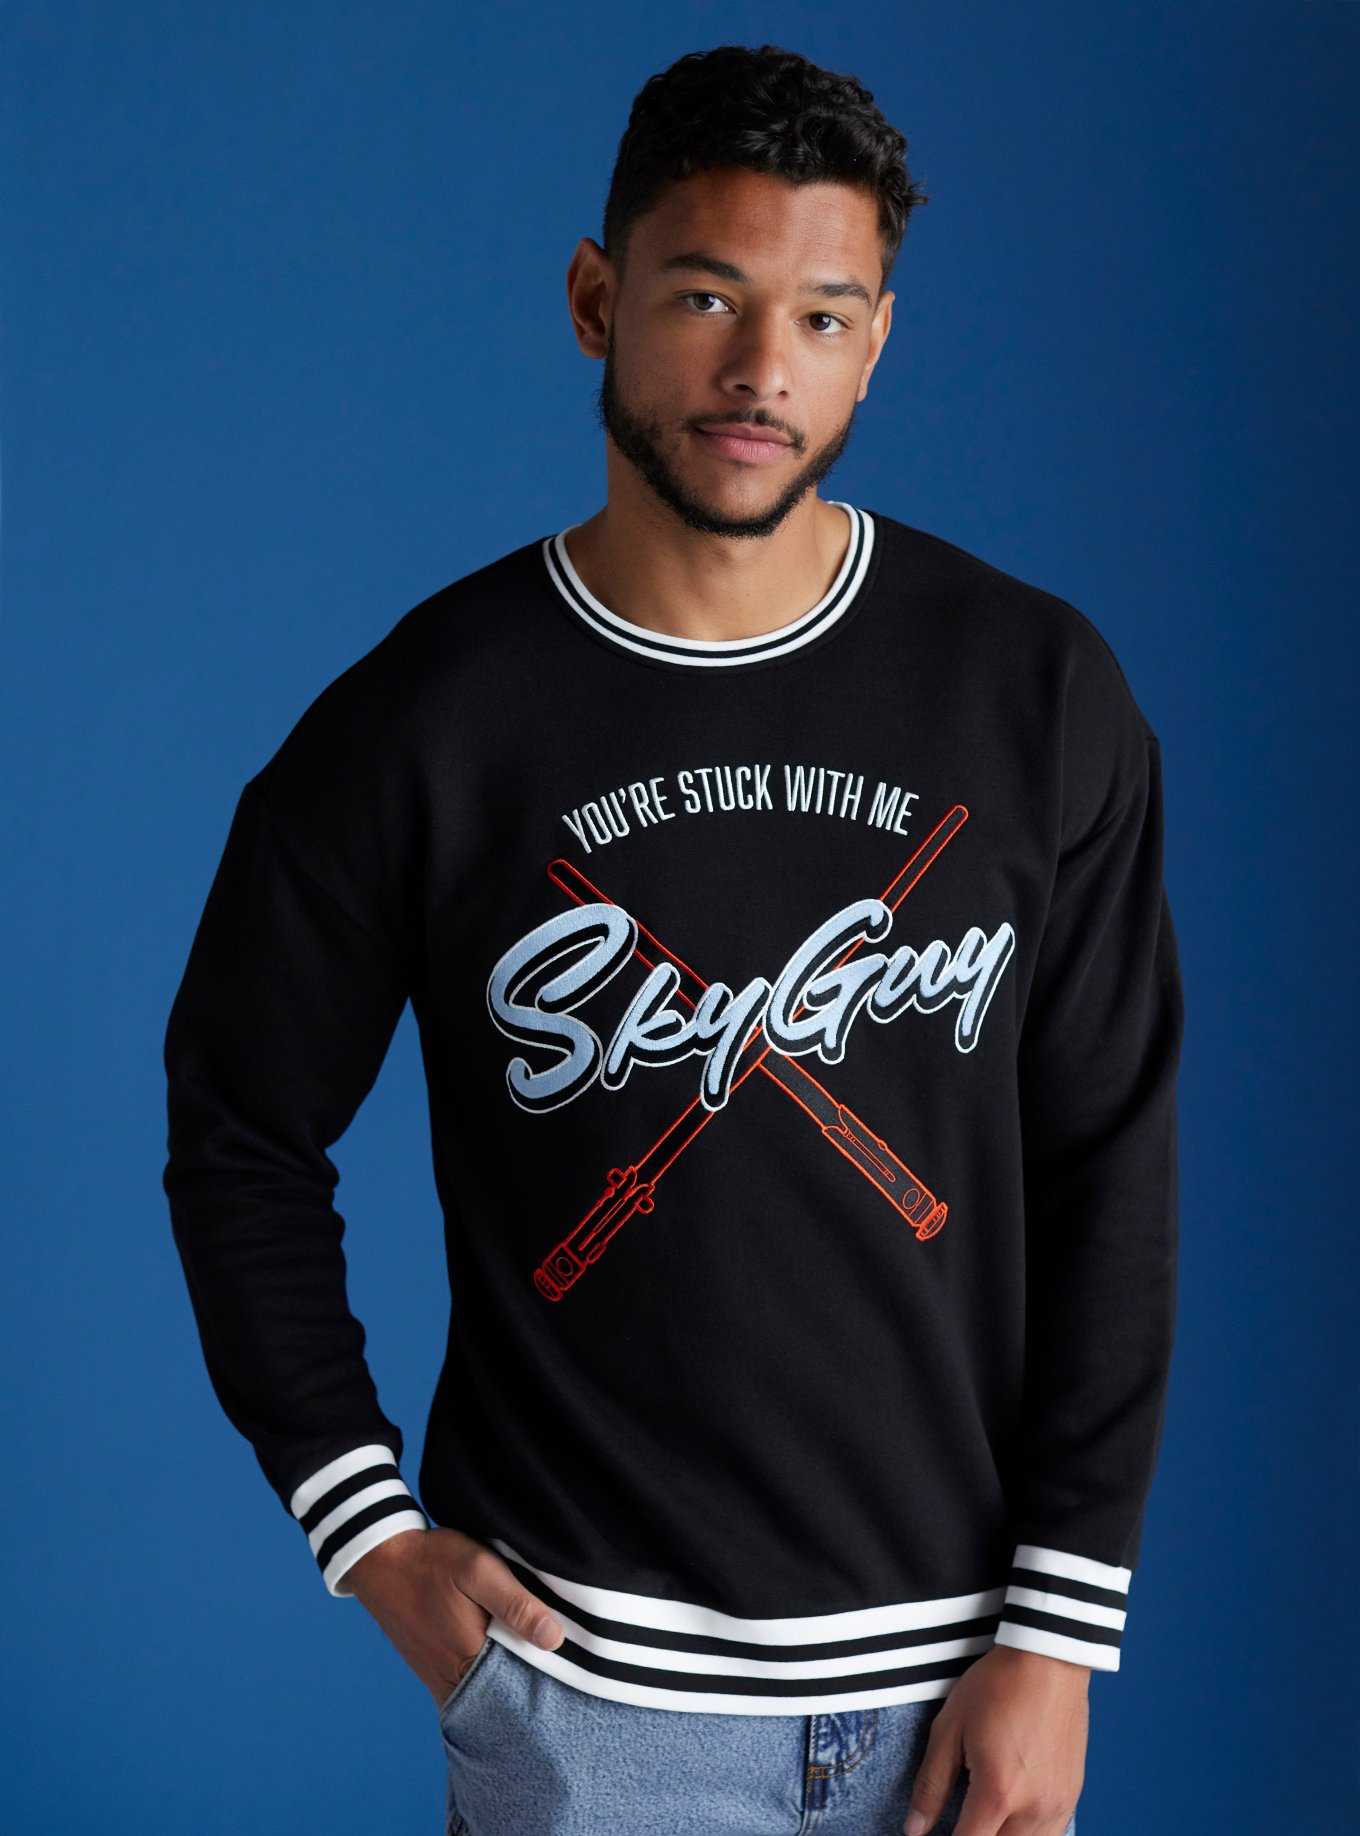 Our Universe Star Wars Stuck With Me SkyGuy Sweatshirt Our Universe Exclusive, , hi-res